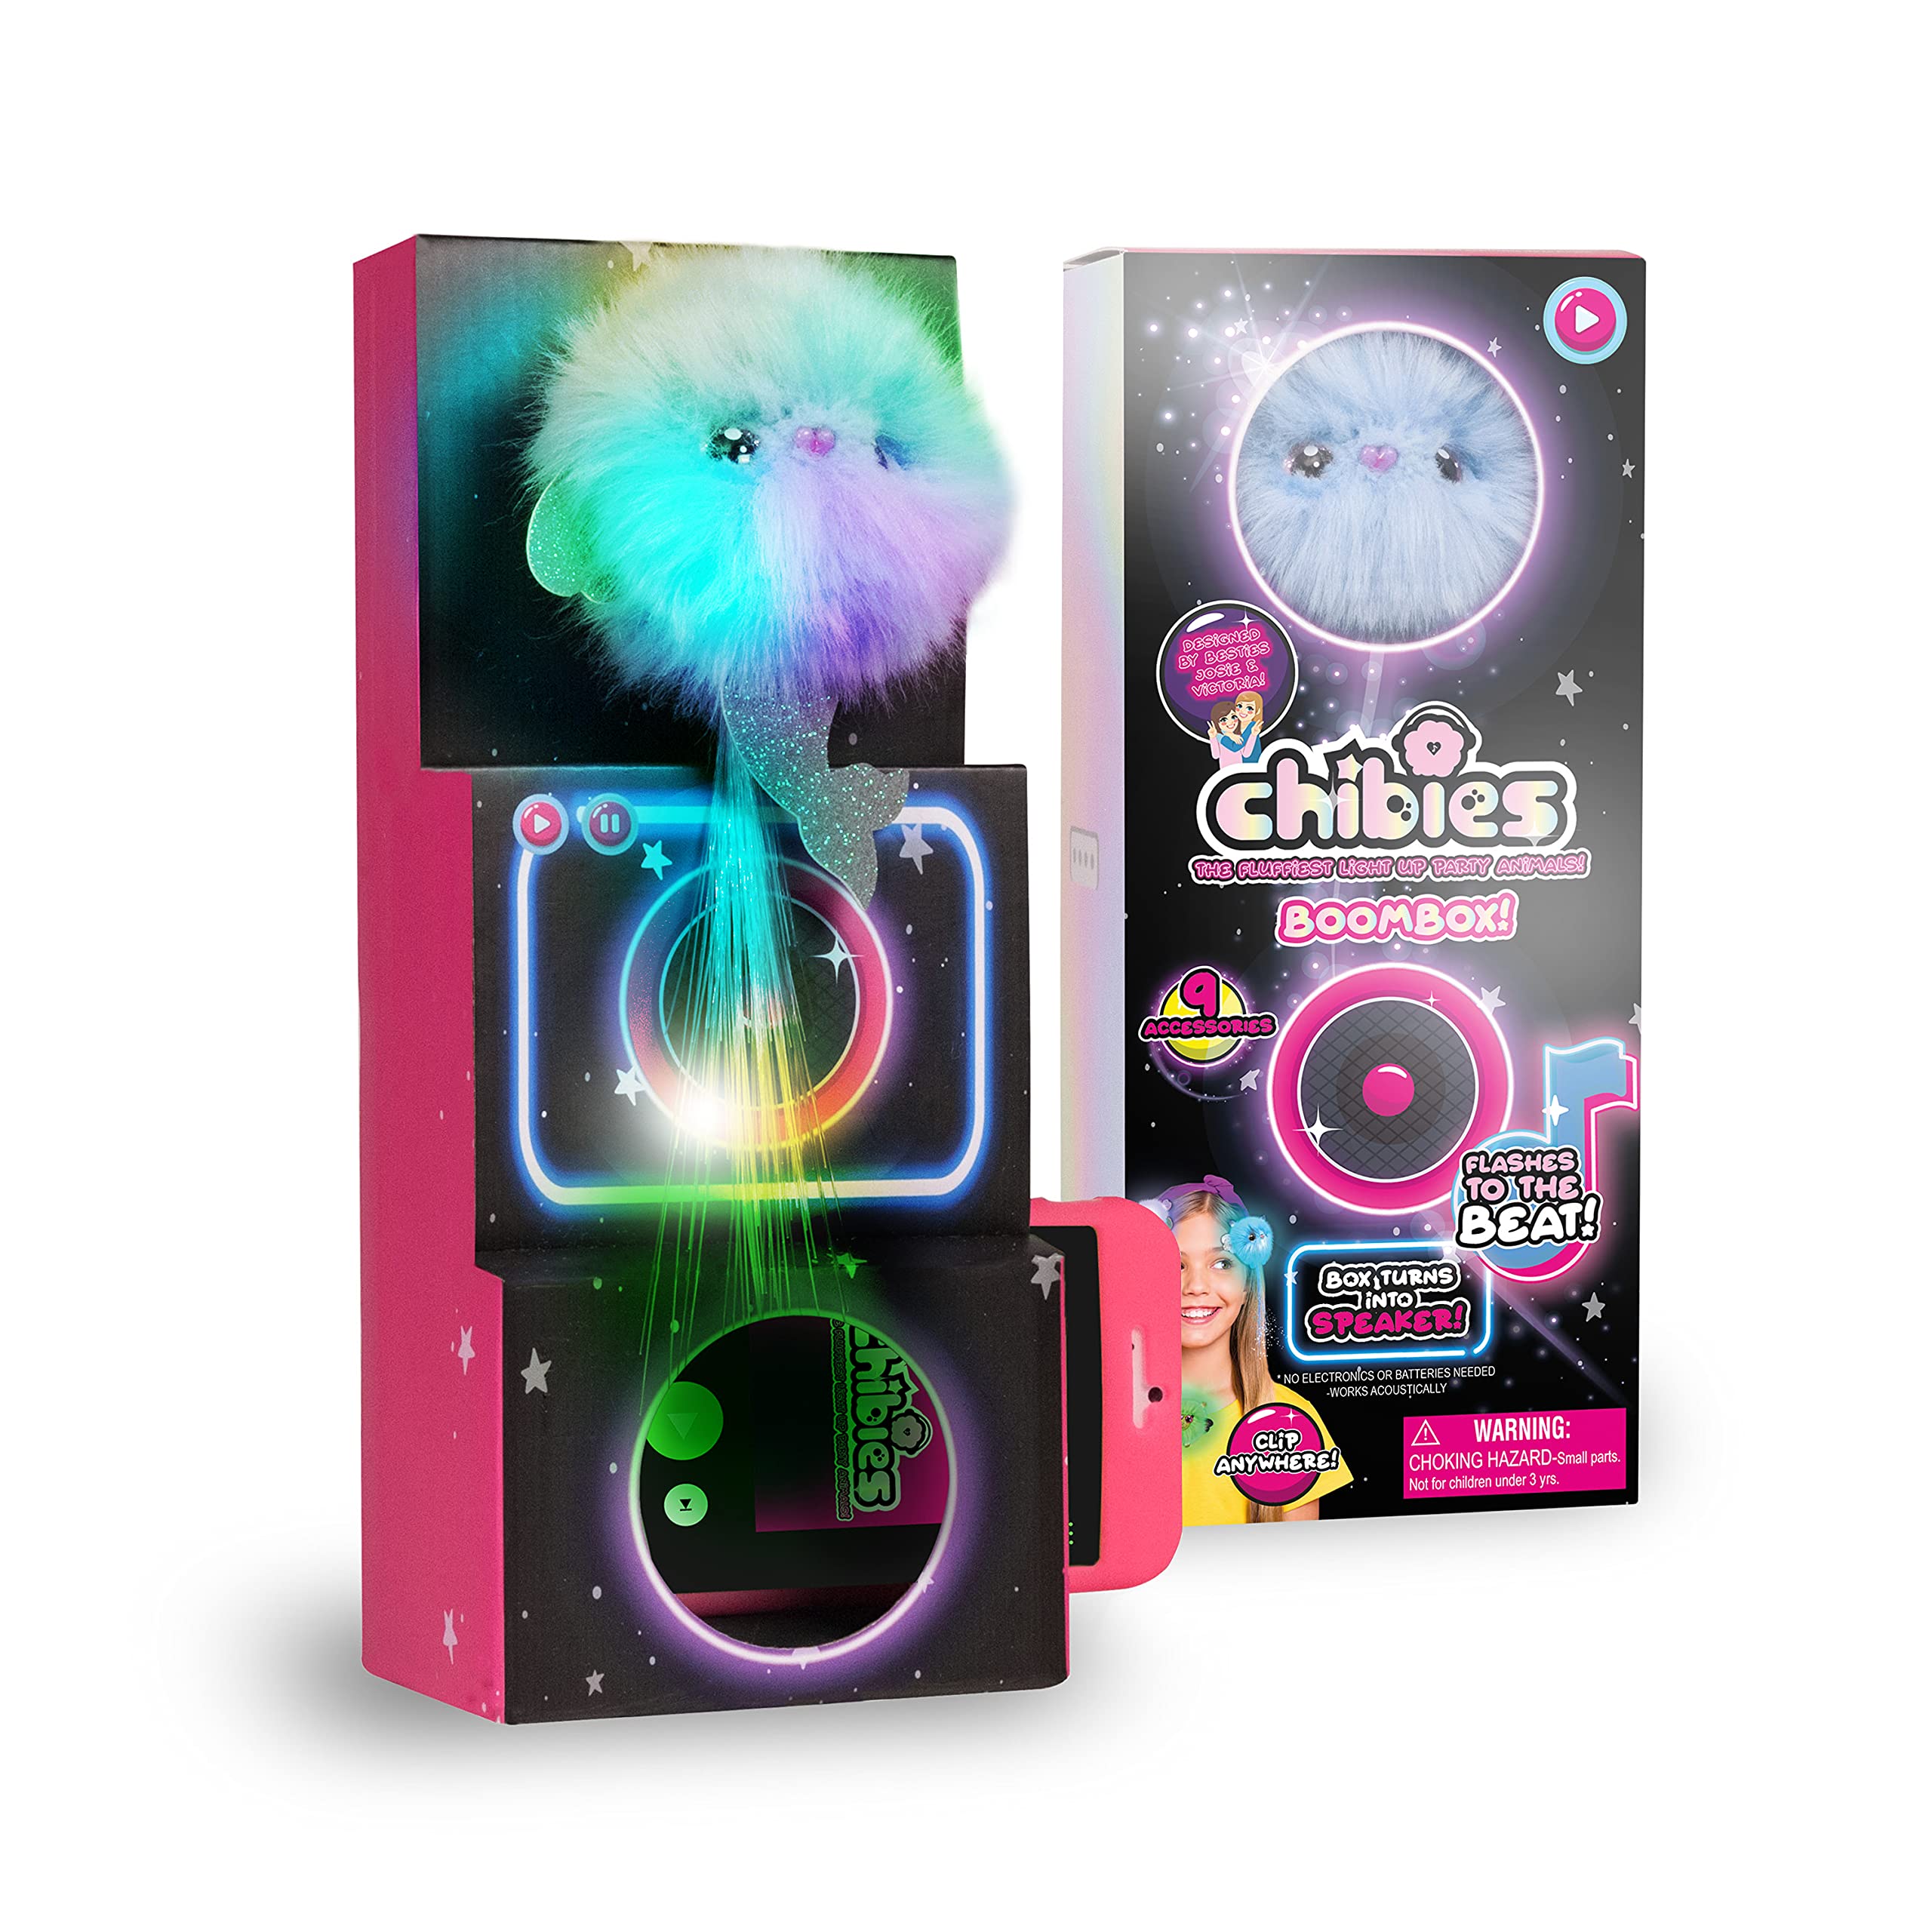 CHIBIES Boom Box - Moonlight | Cute Fluffy Party Pets That Flash to The Beat of Music | Interactive Animal Soft Toy Characters